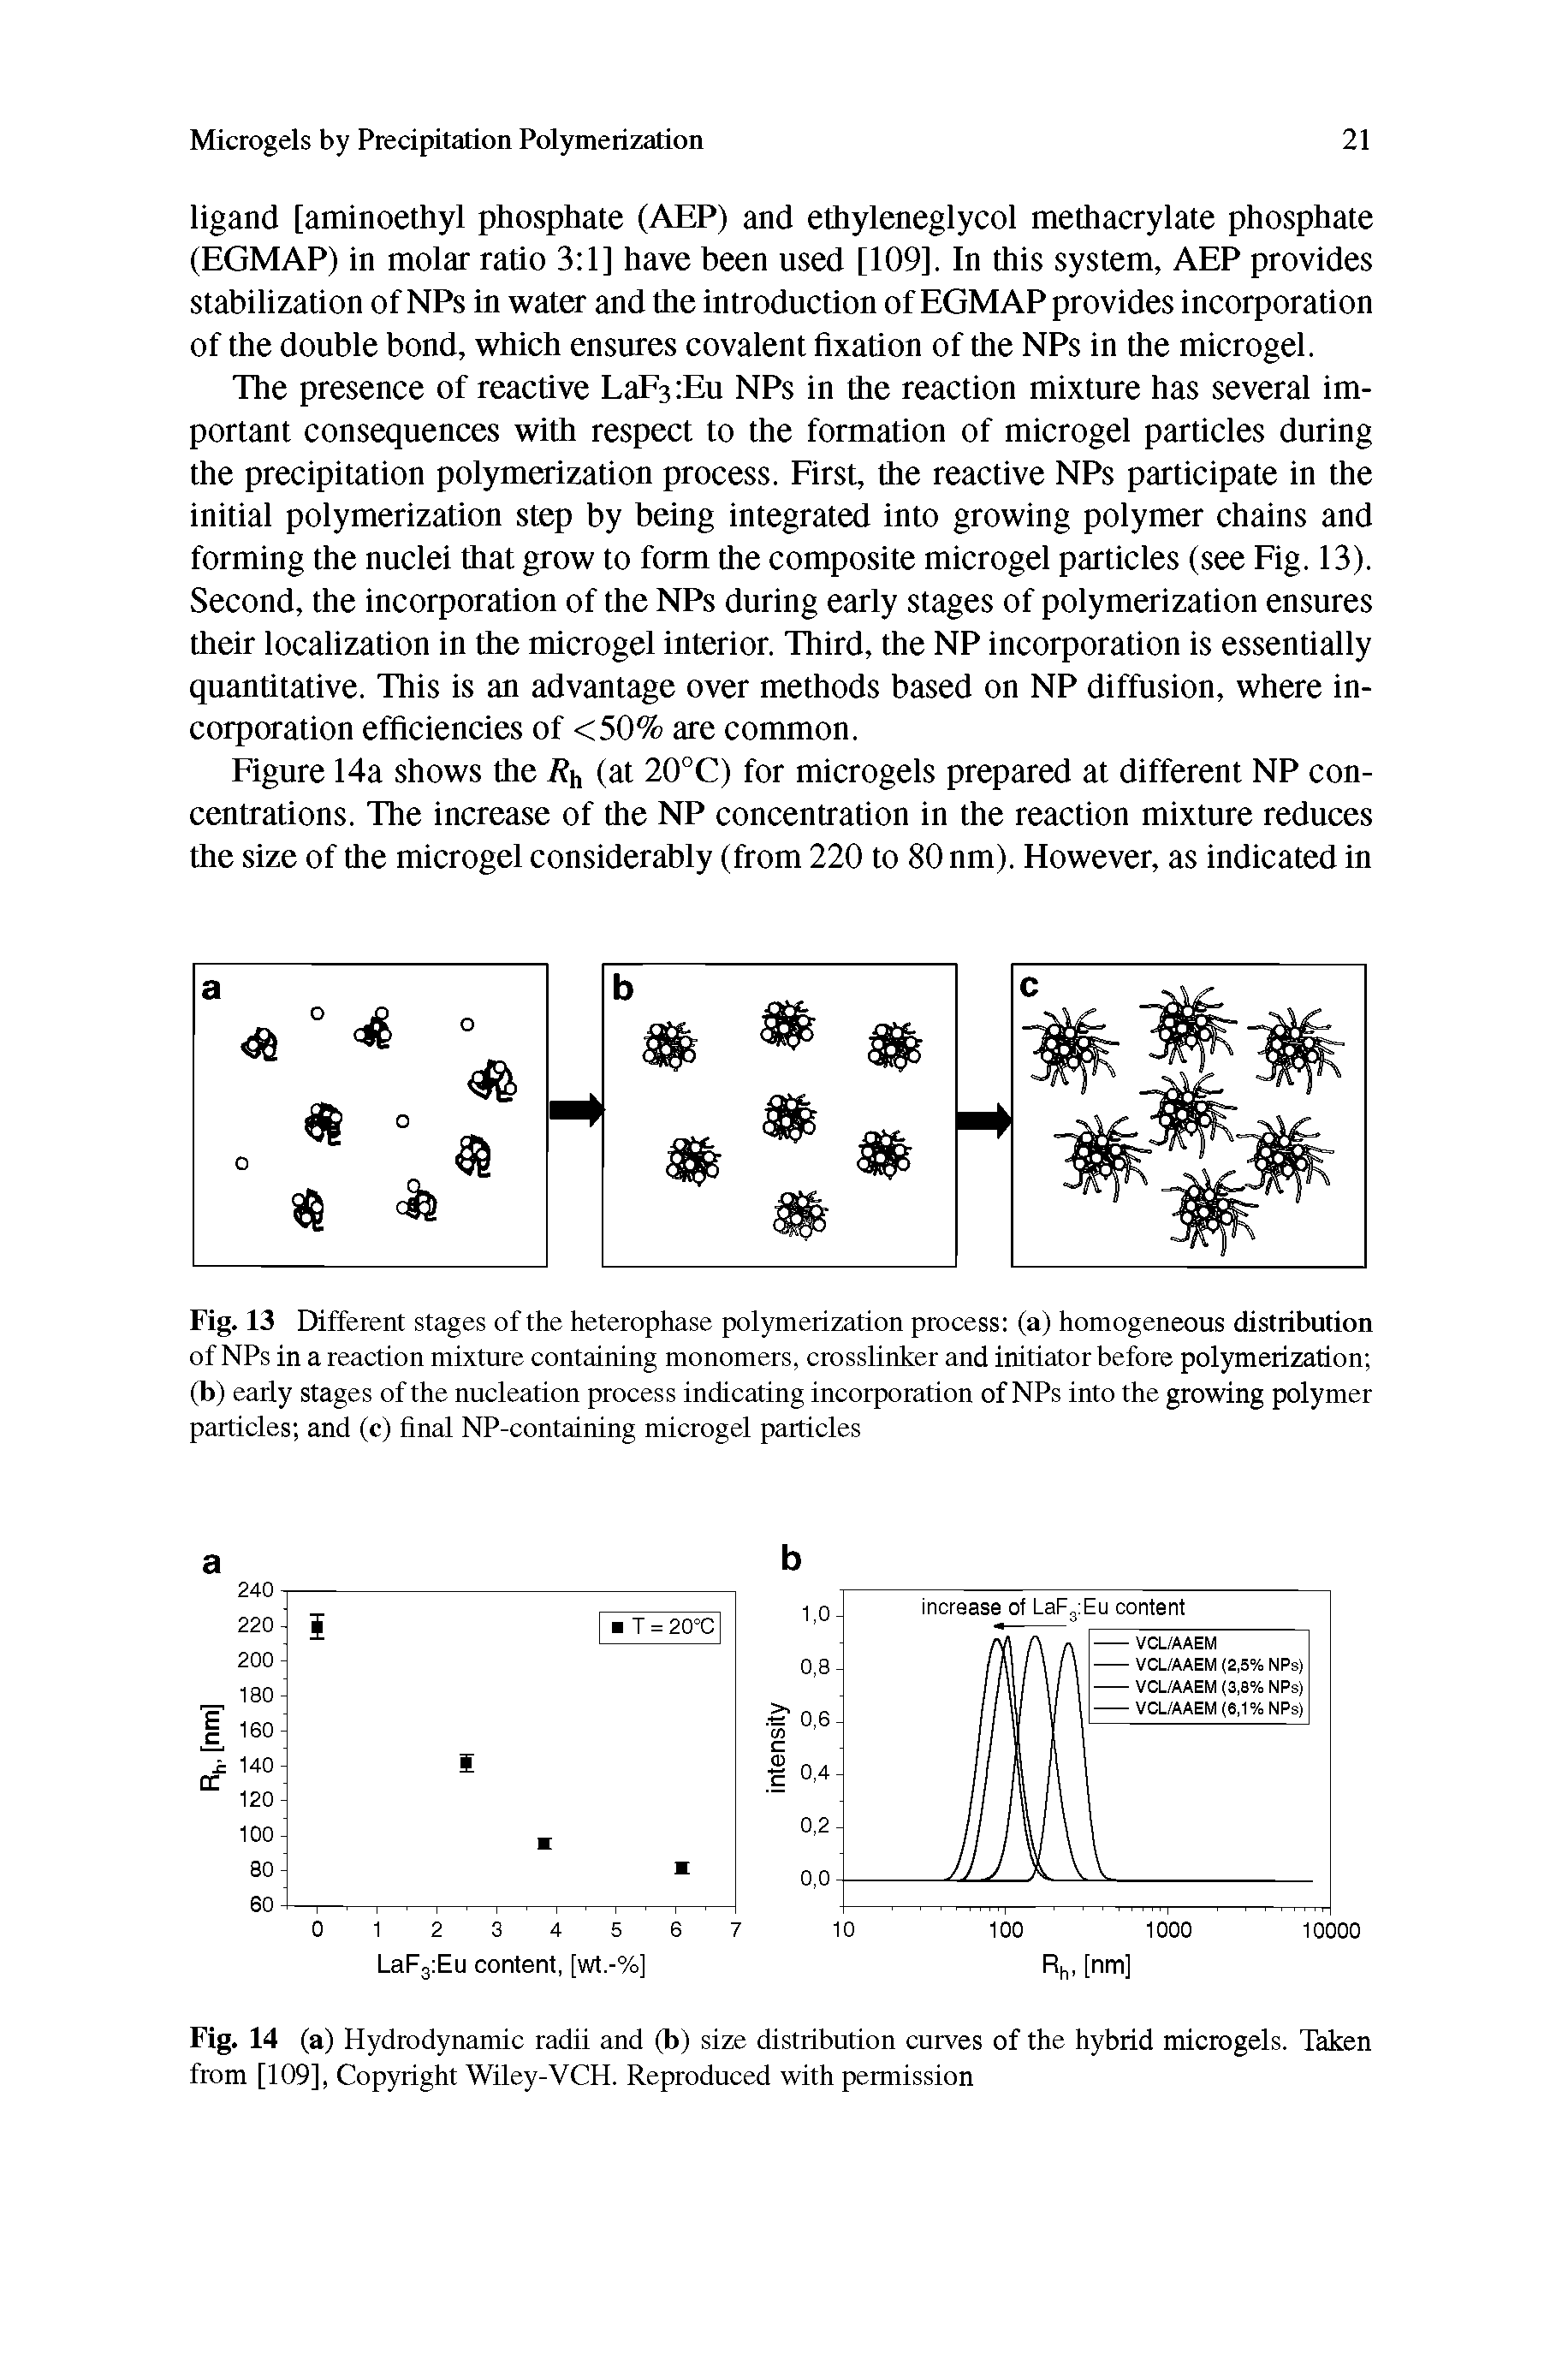 Fig. 13 Different stages of the heterophase polymerization process (a) homogeneous distribution of NPs in a reaction mixture containing monomers, crosslinker and initiator before polymerization (b) early stages of the nucleation process indicating incorporation of NPs into the growing polymer particles and (c) final NP-containing microgel particles...